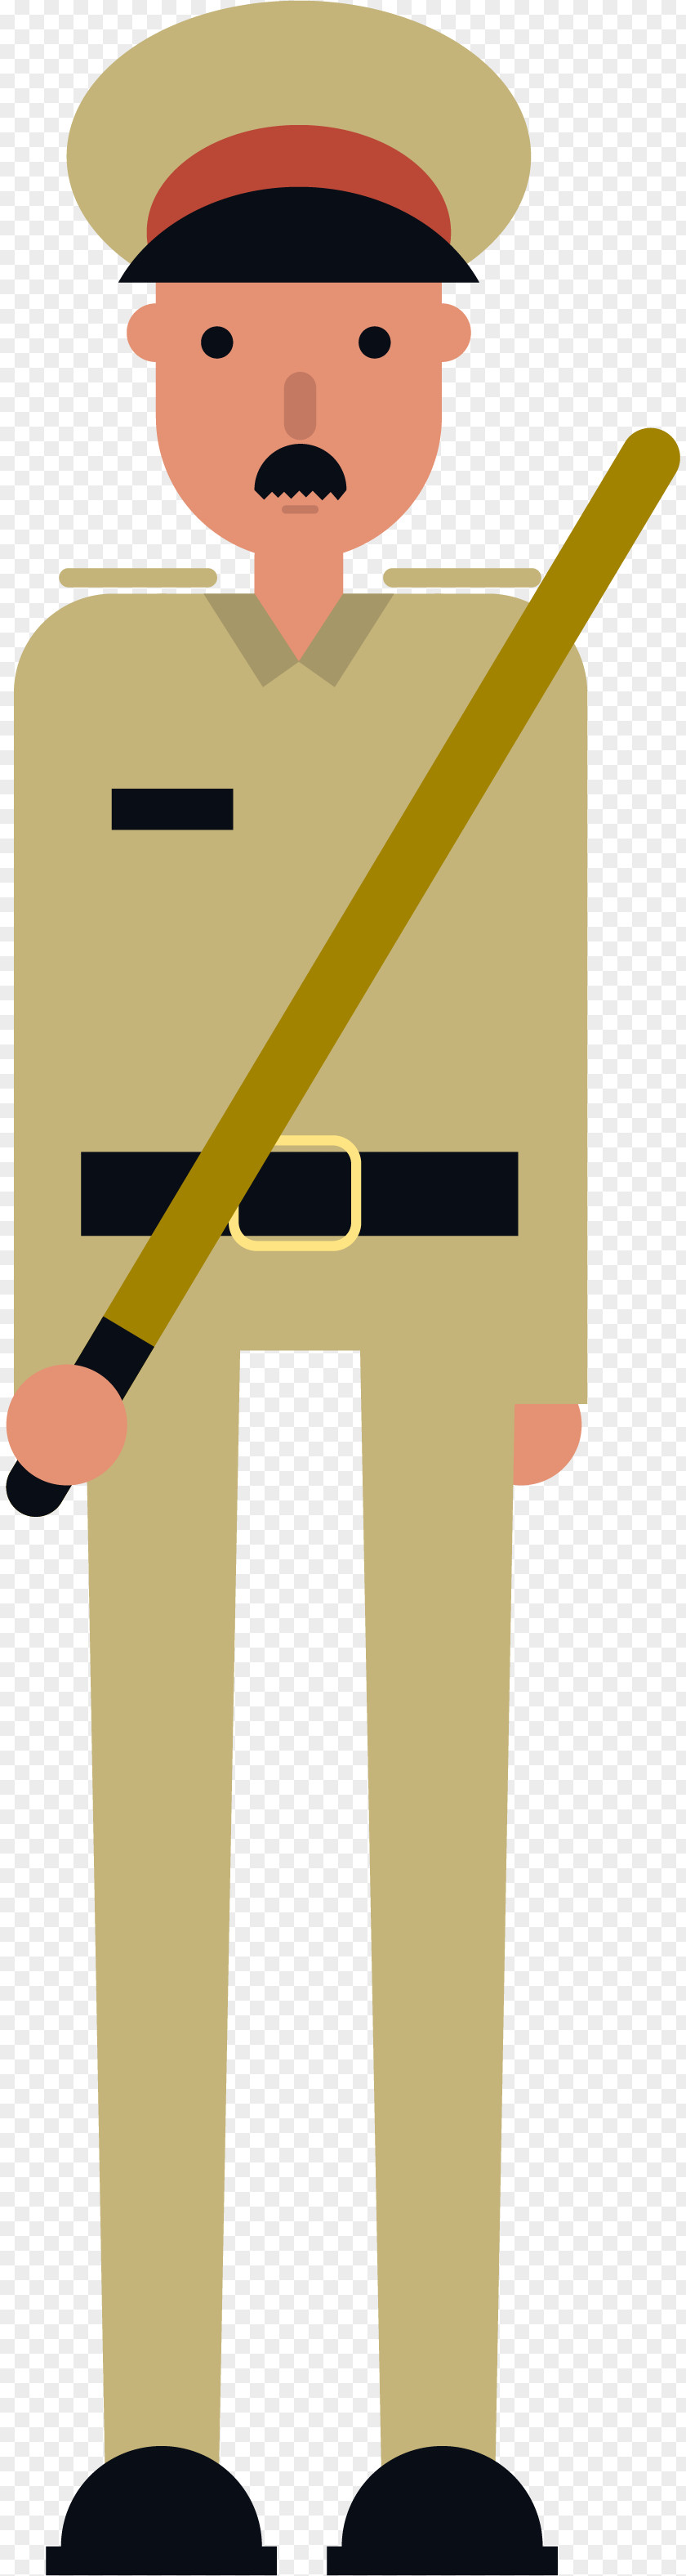 Police Sergeant Clip Art PNG